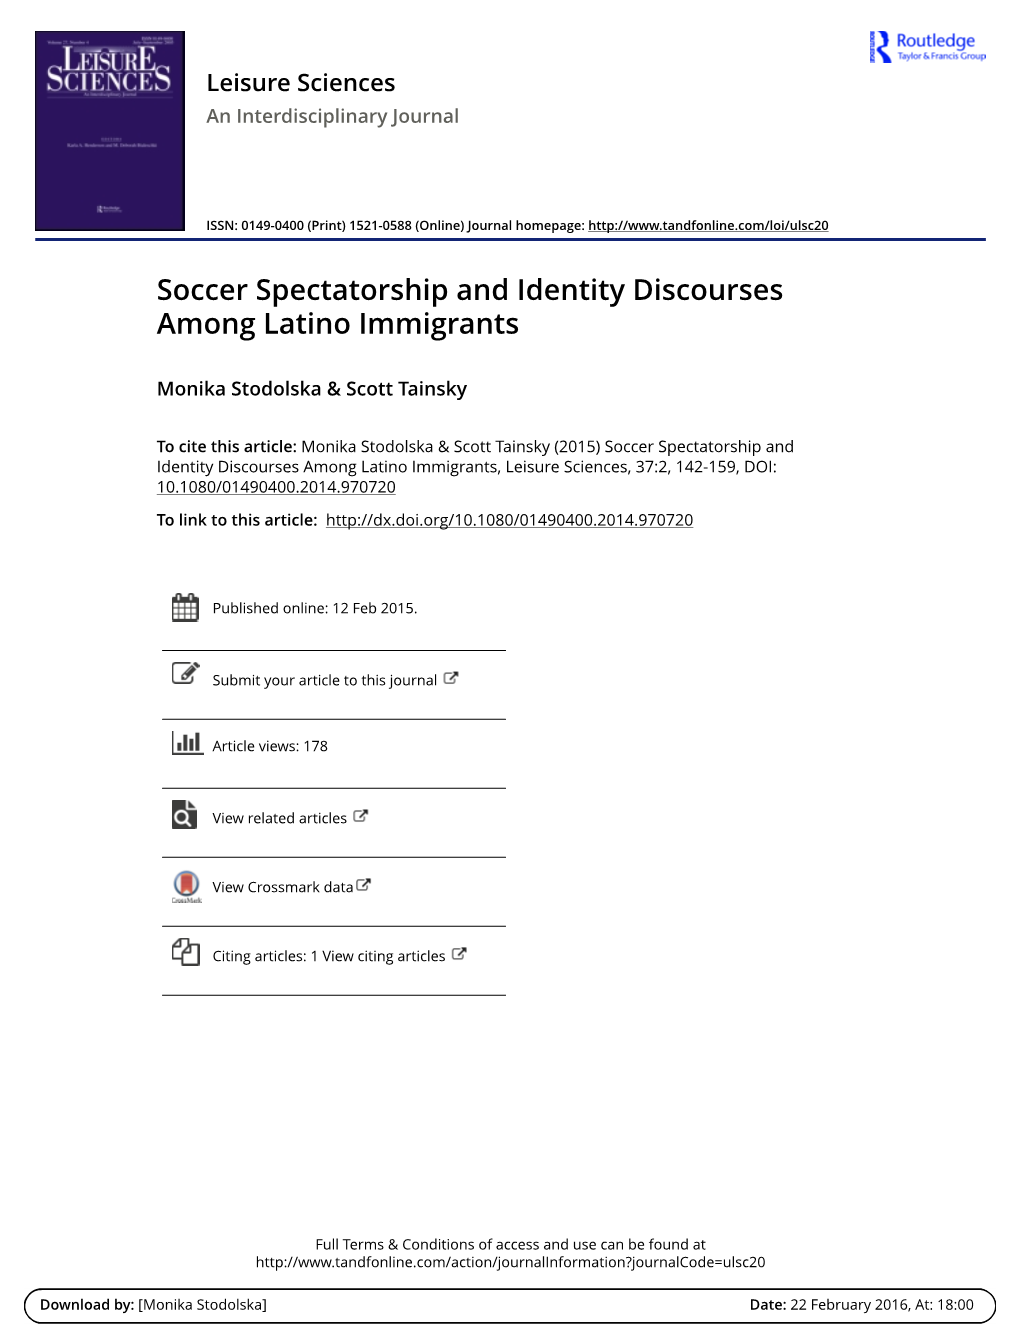 Soccer Spectatorship and Identity Discourses Among Latino Immigrants